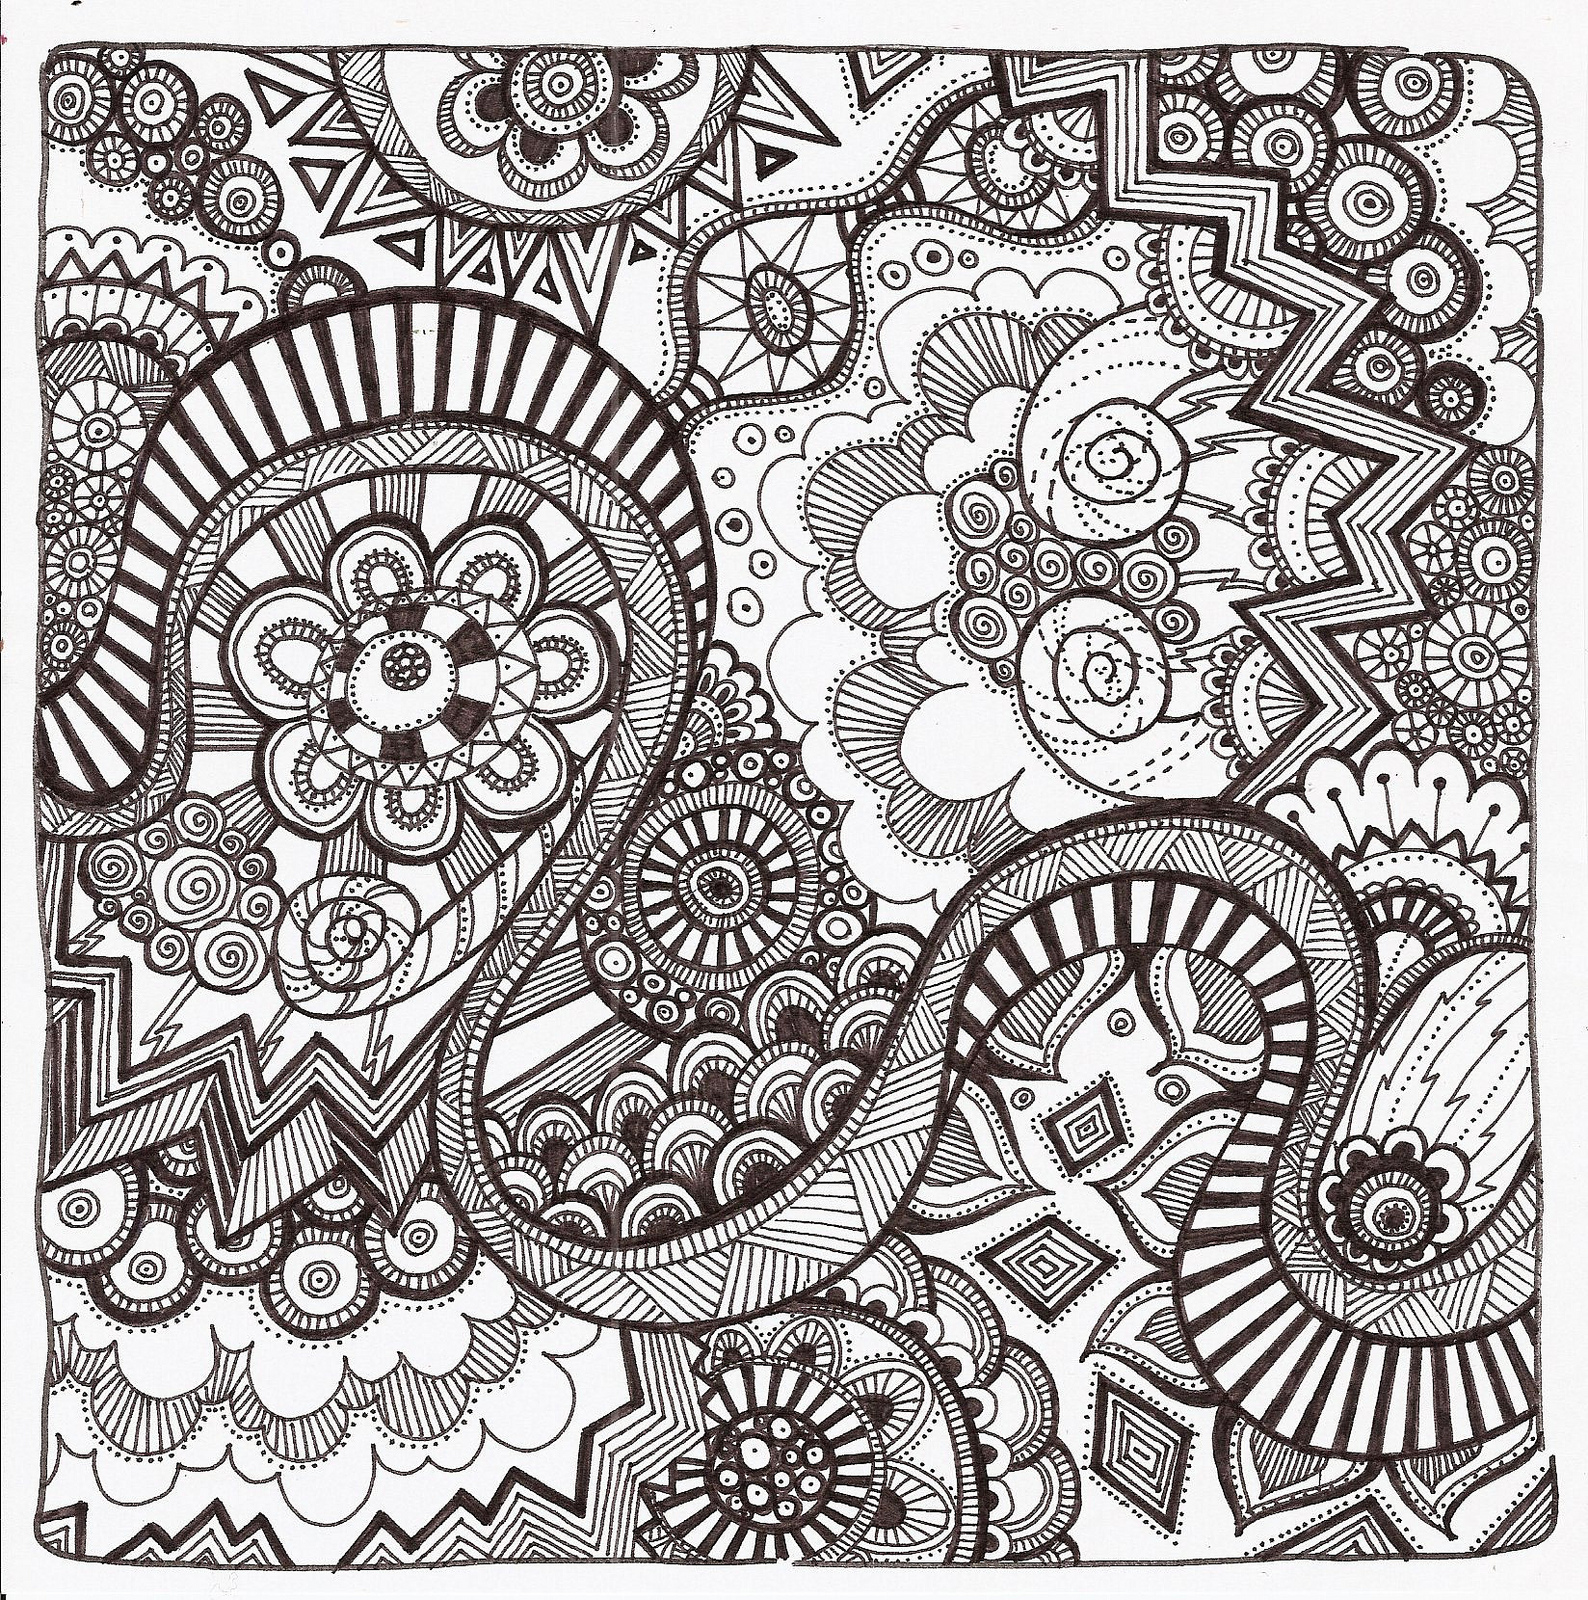 Download Free Printable Zentangle Coloring Pages for Adults